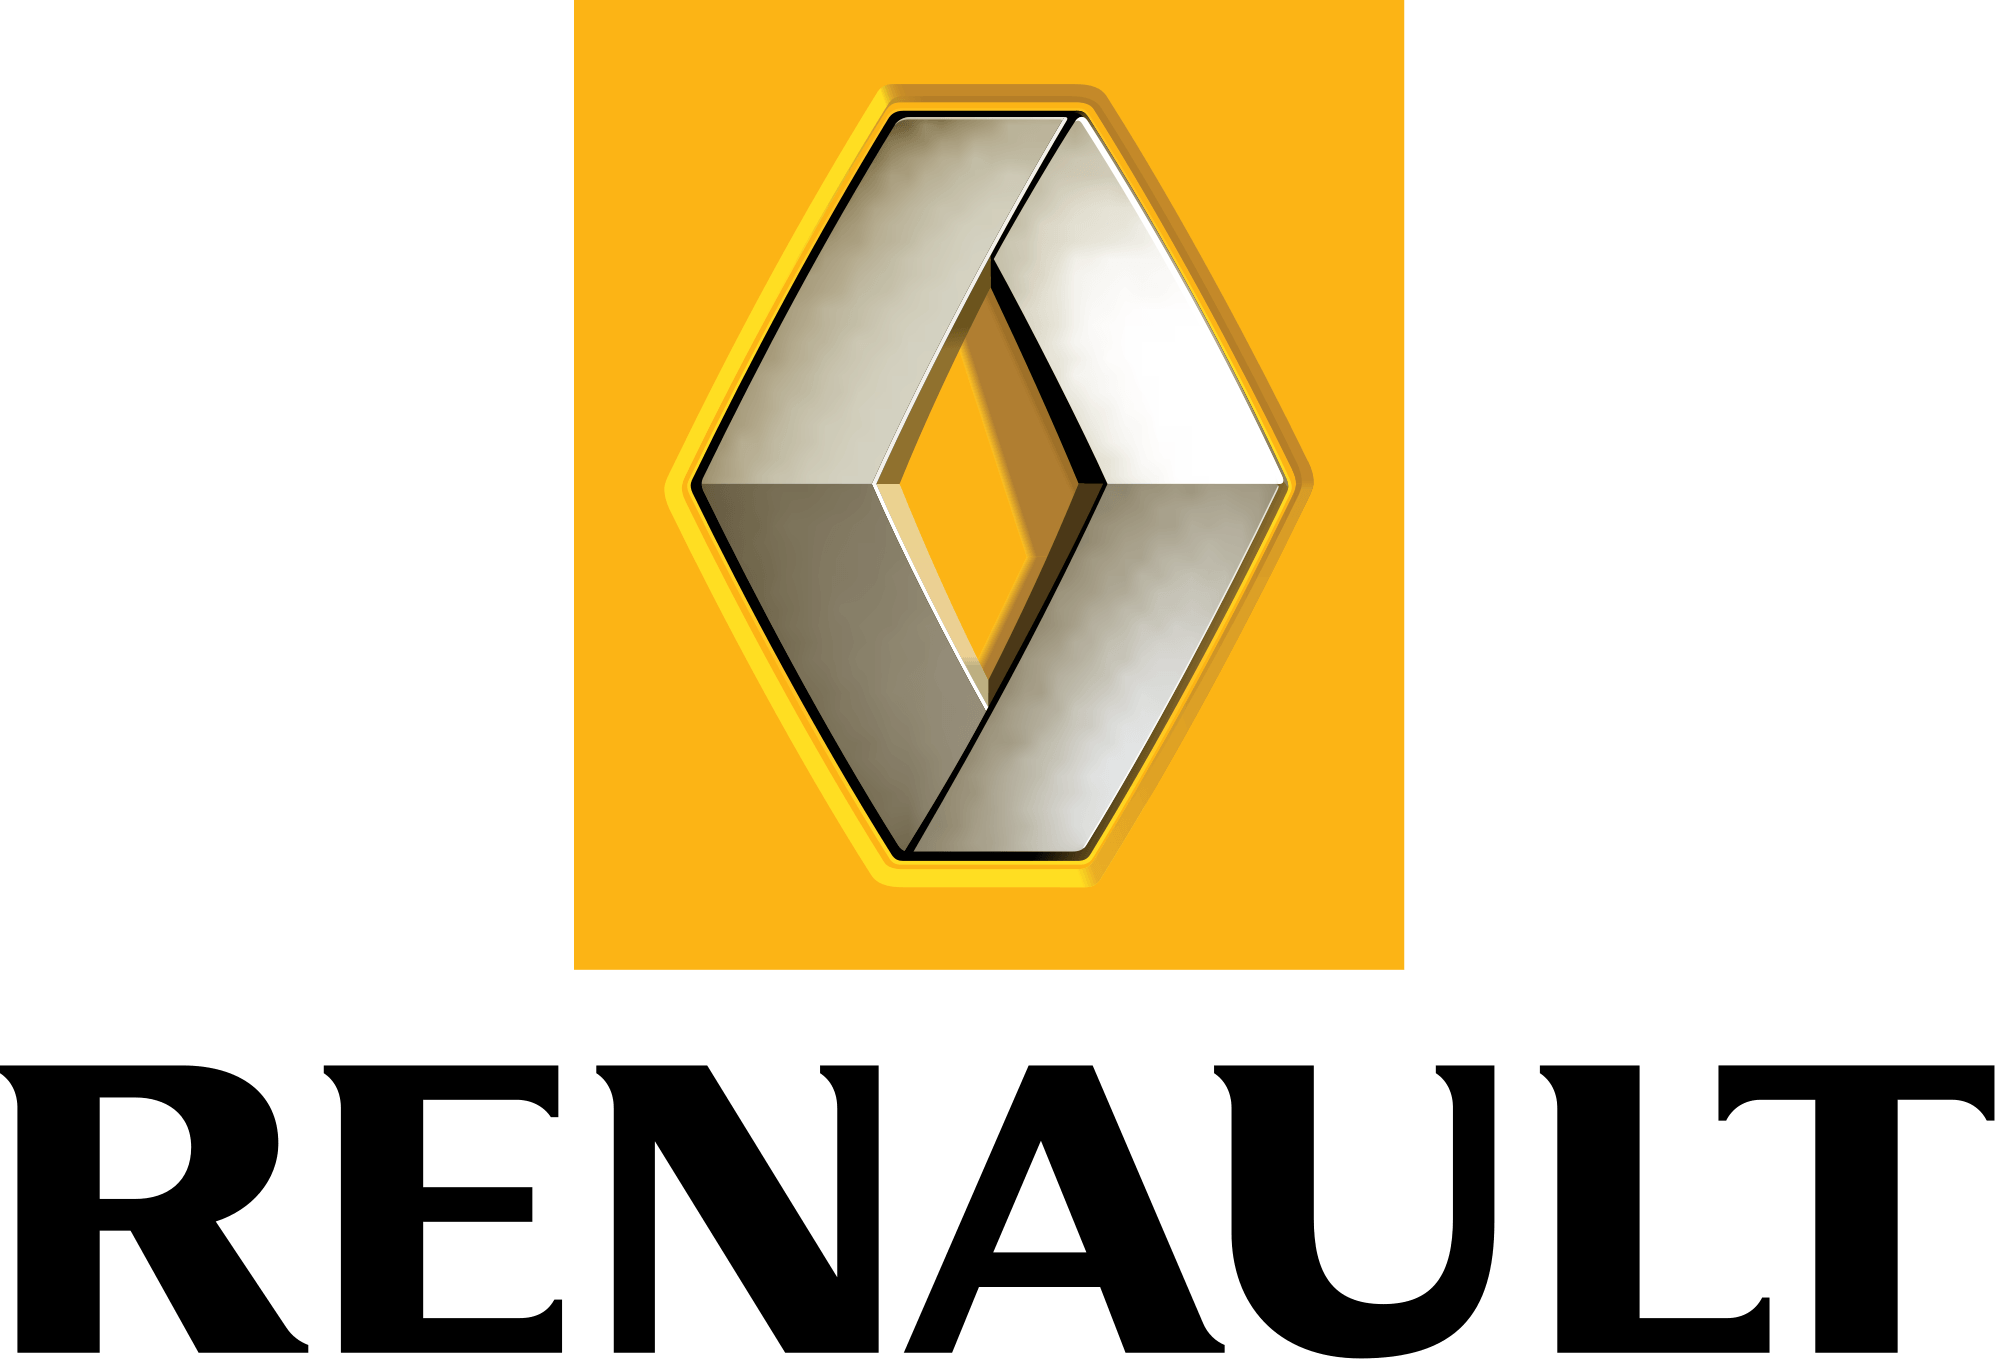 Auto Asset Logo - Renault Logo, Renault Car Symbol Meaning and History | Car Brand ...